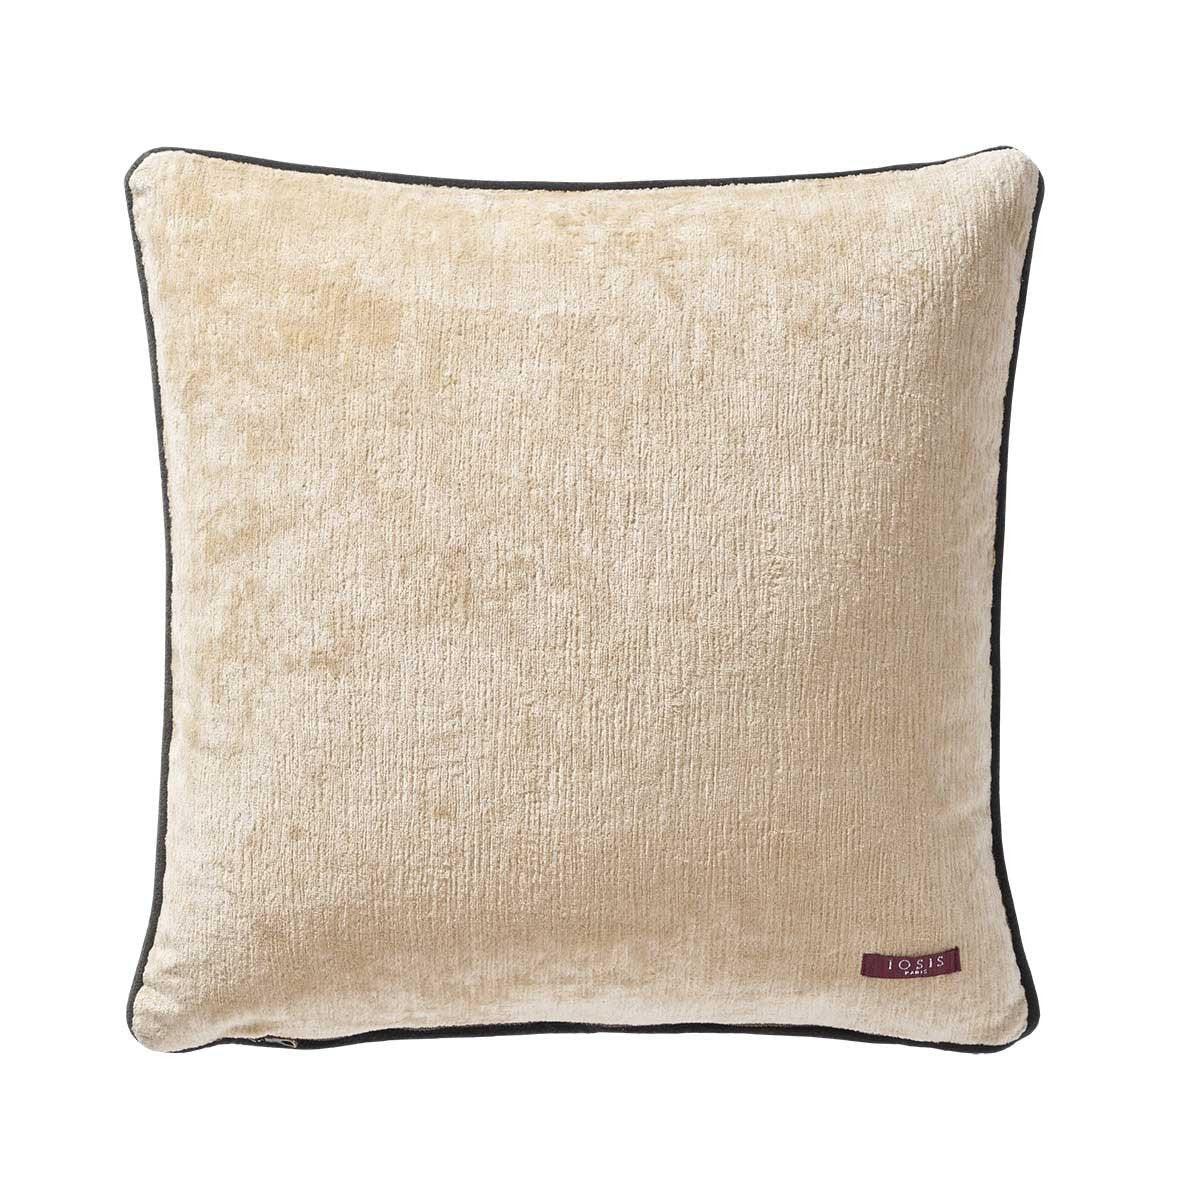 Boromee Greige Decorative Pillow by Iosis | Fig Linens and Home